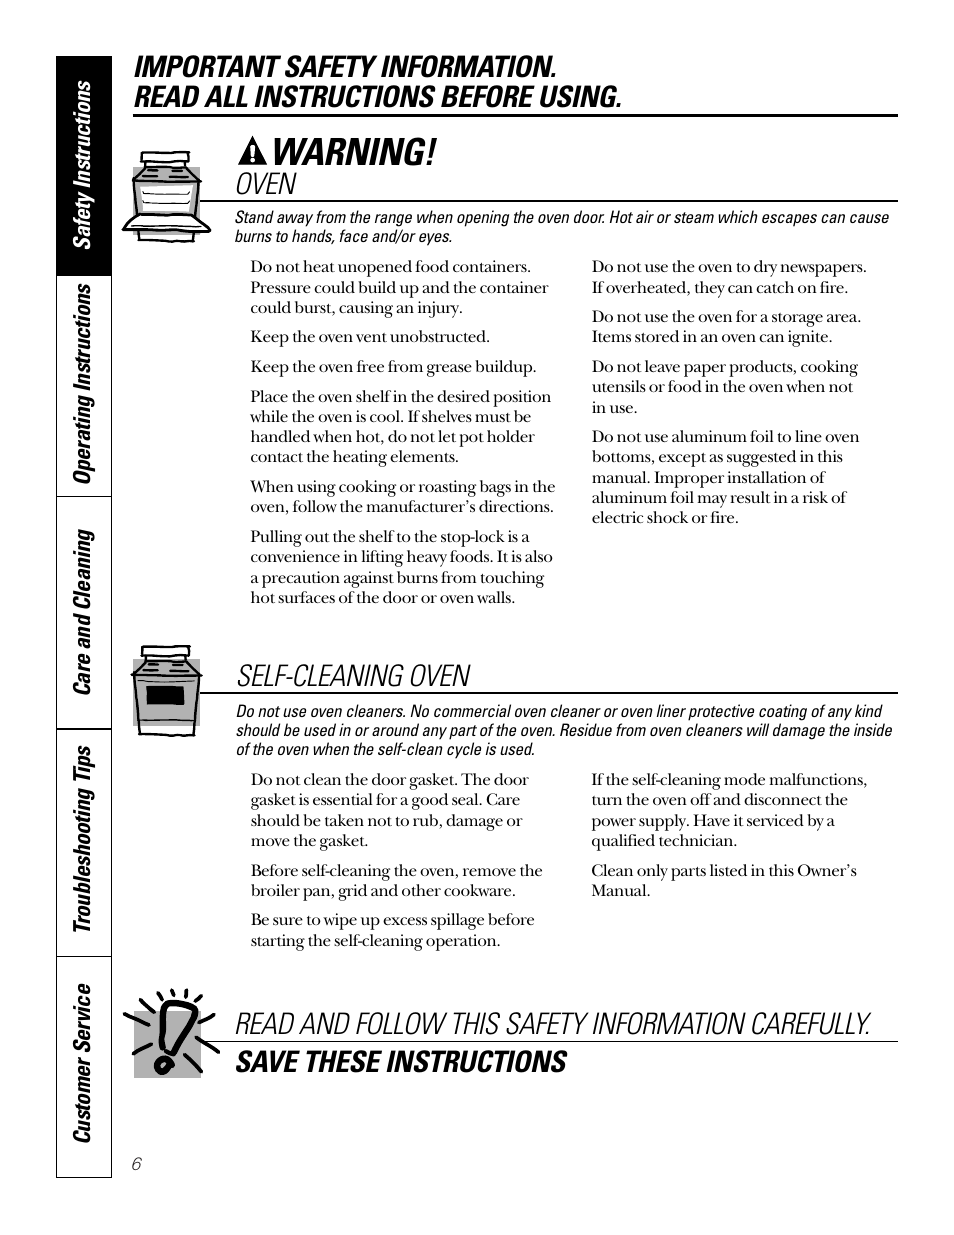 Oven, Warning, Self-cleaning oven | Sharp JB940 User Manual | Page 6 / 40